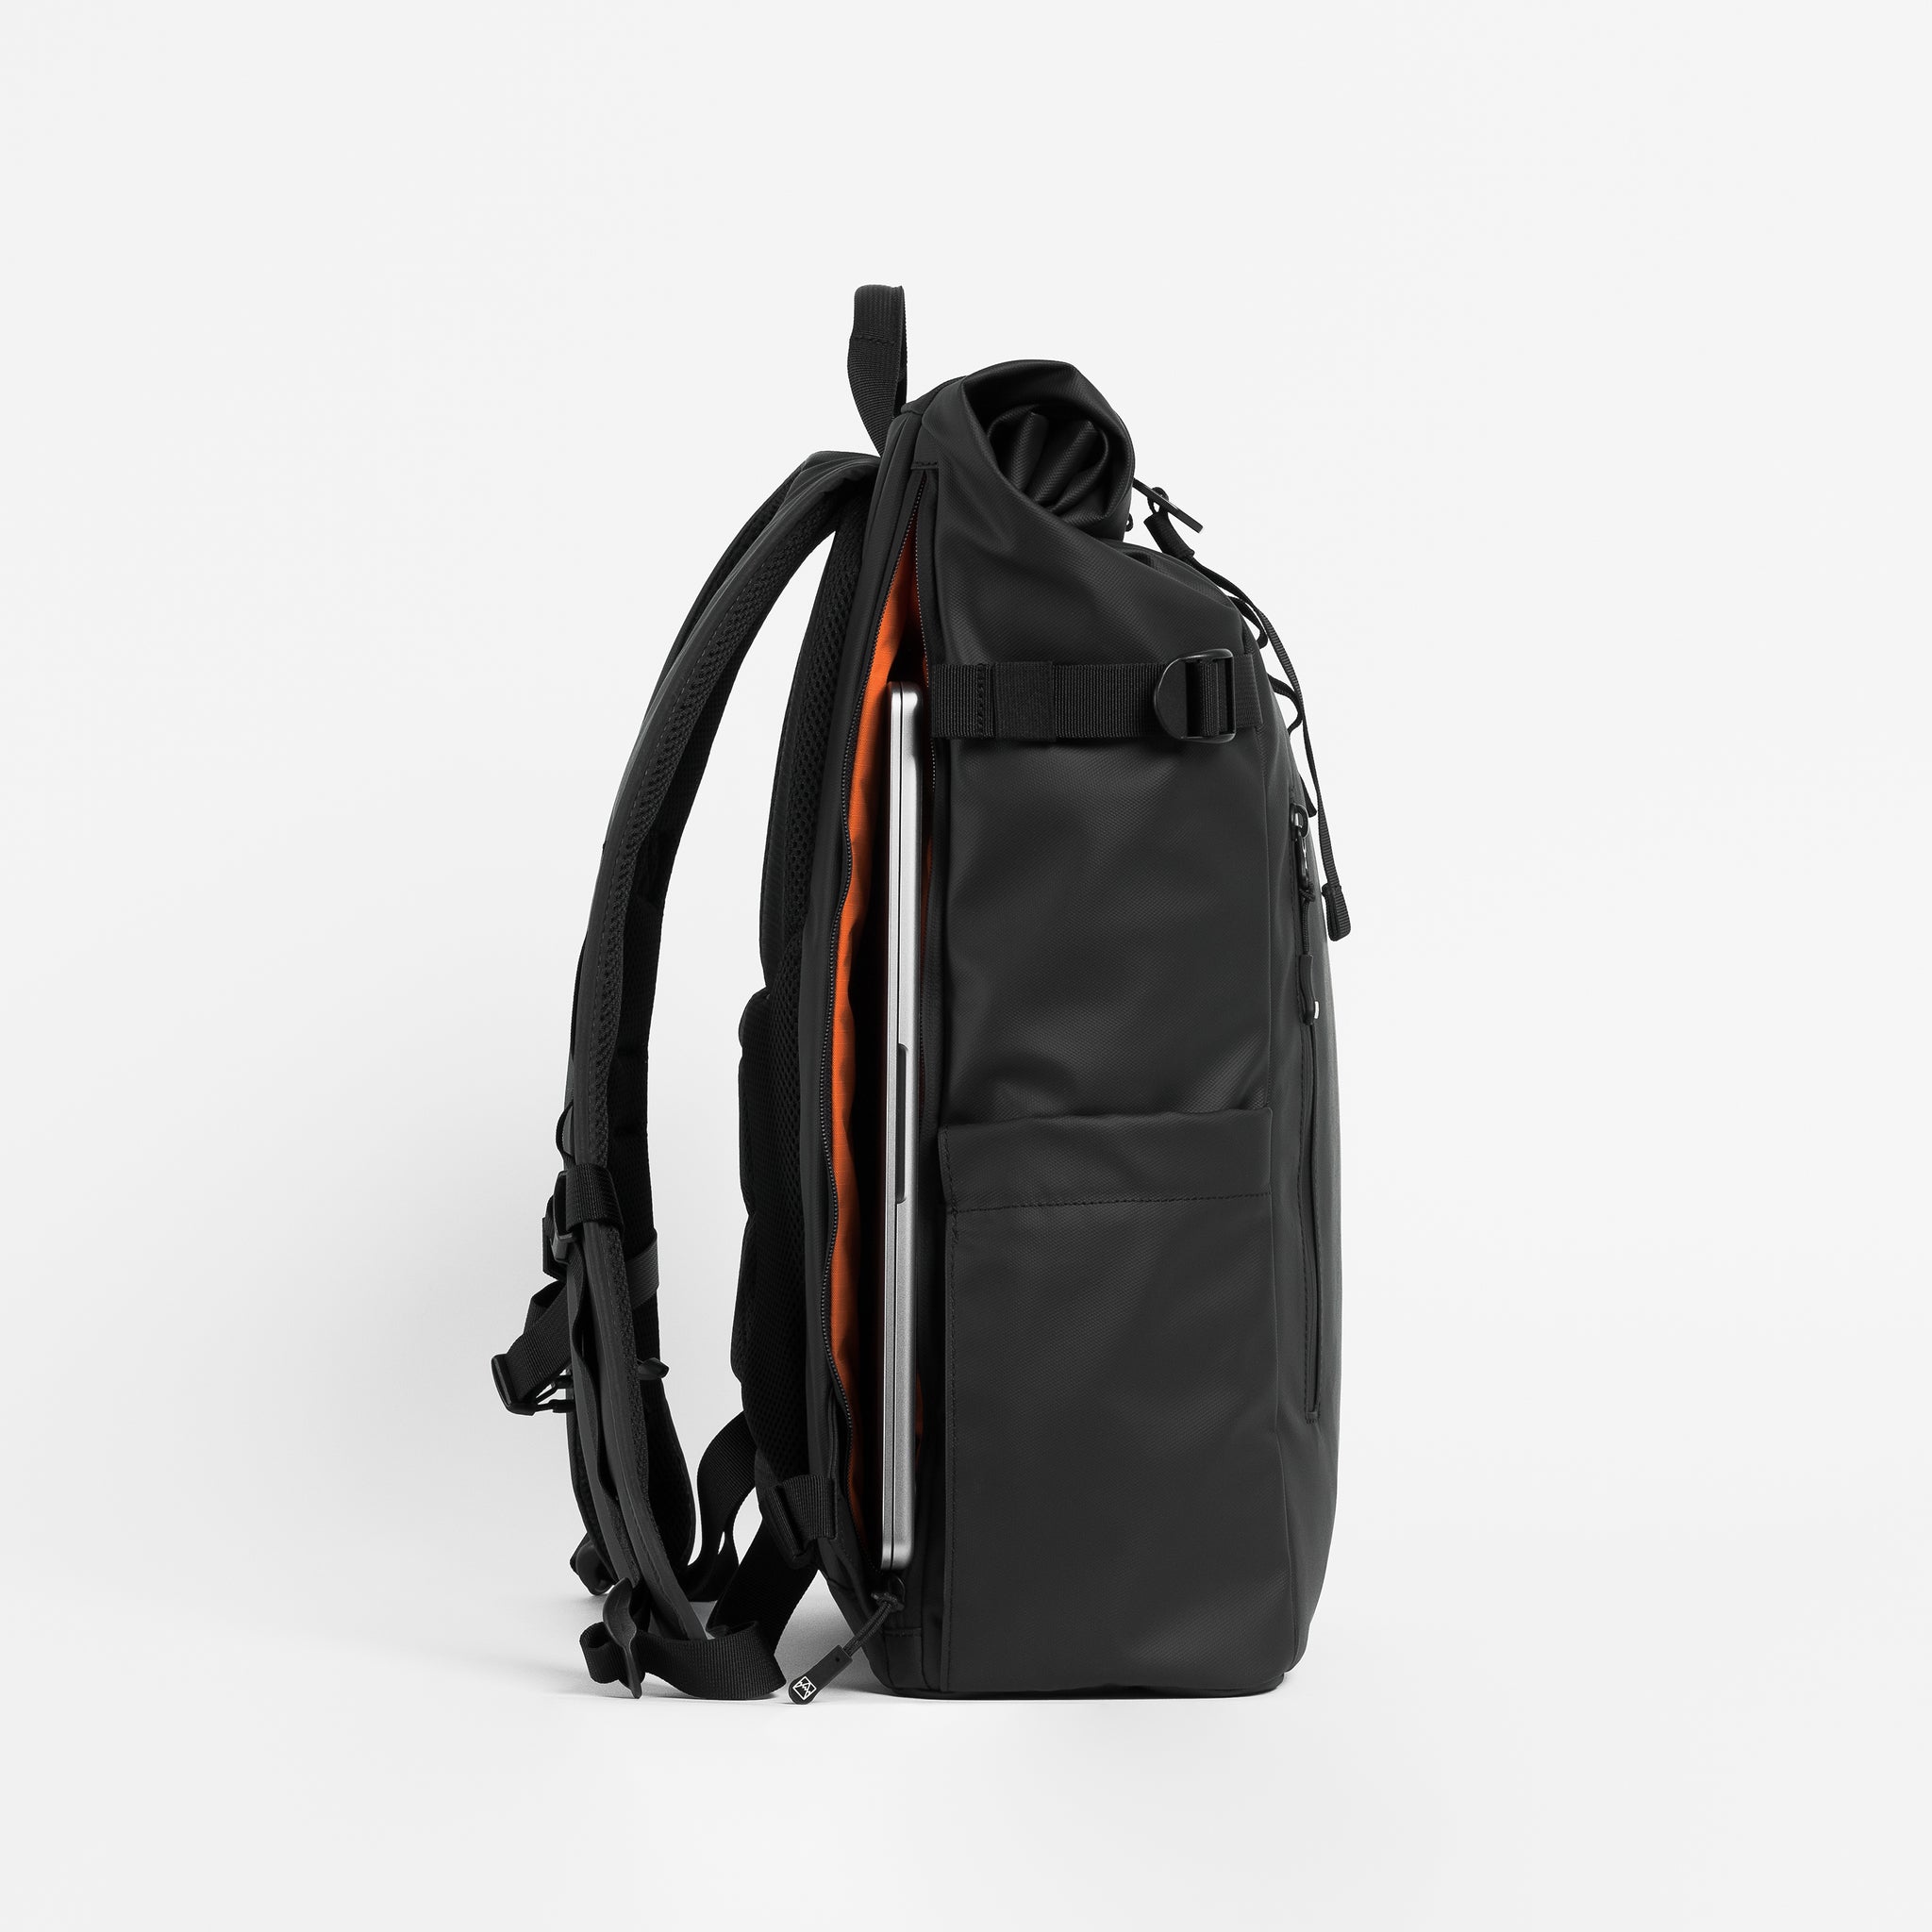 Side view of The Roll Top 20L Backpack in All Black with laptop compartment